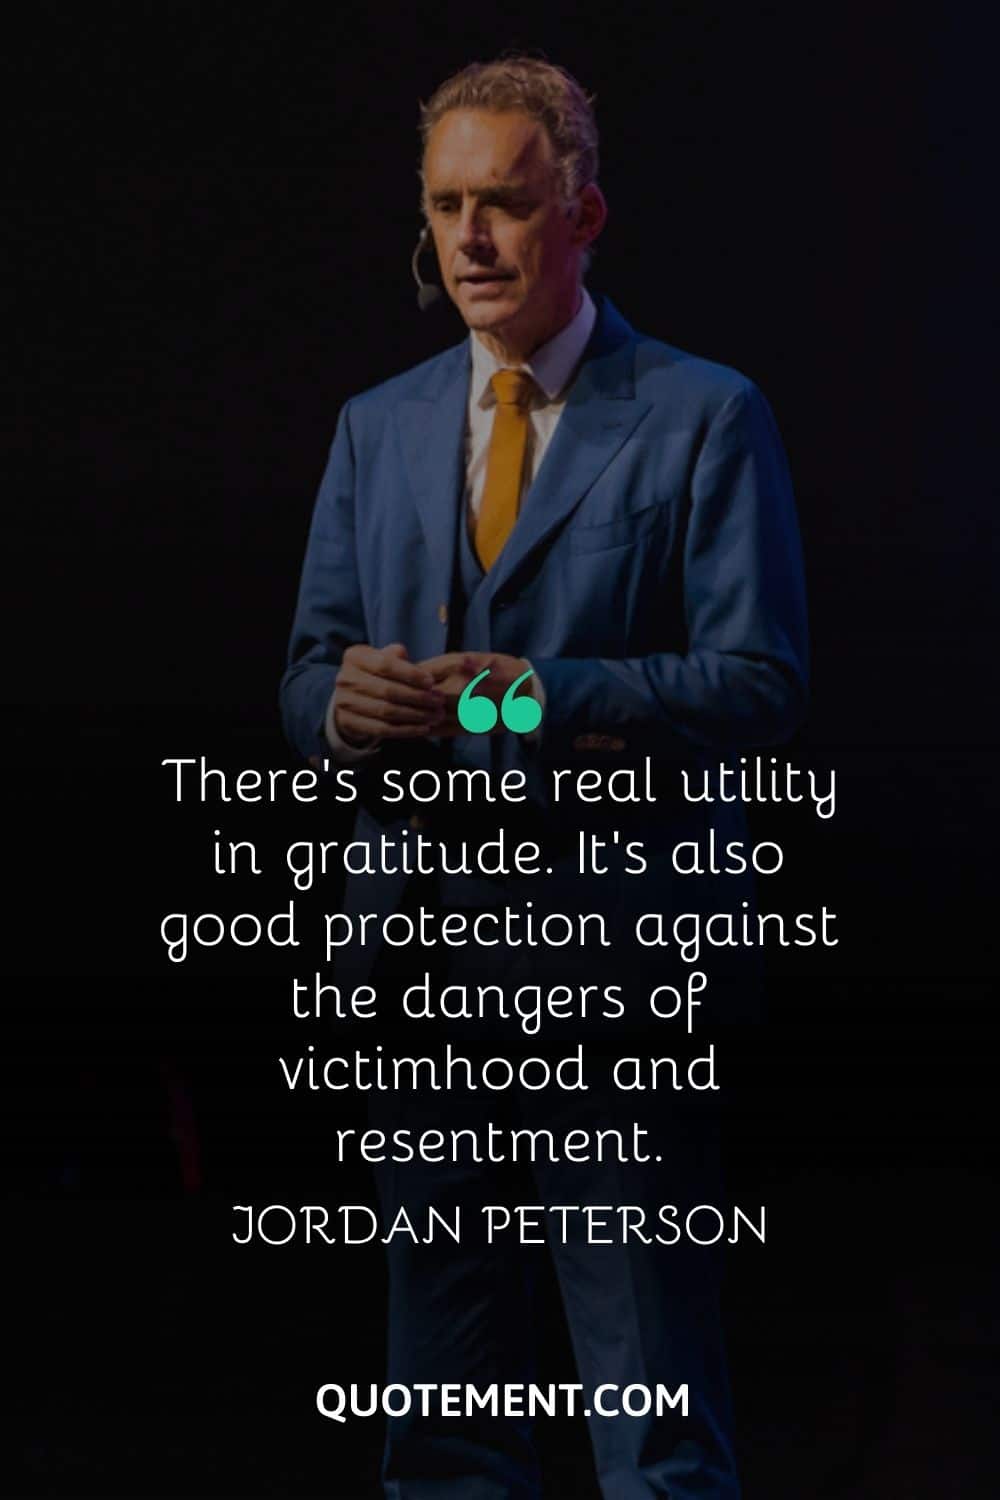 “There’s some real utility in gratitude. It’s also good protection against the dangers of victimhood and resentment.” — Jordan Peterson